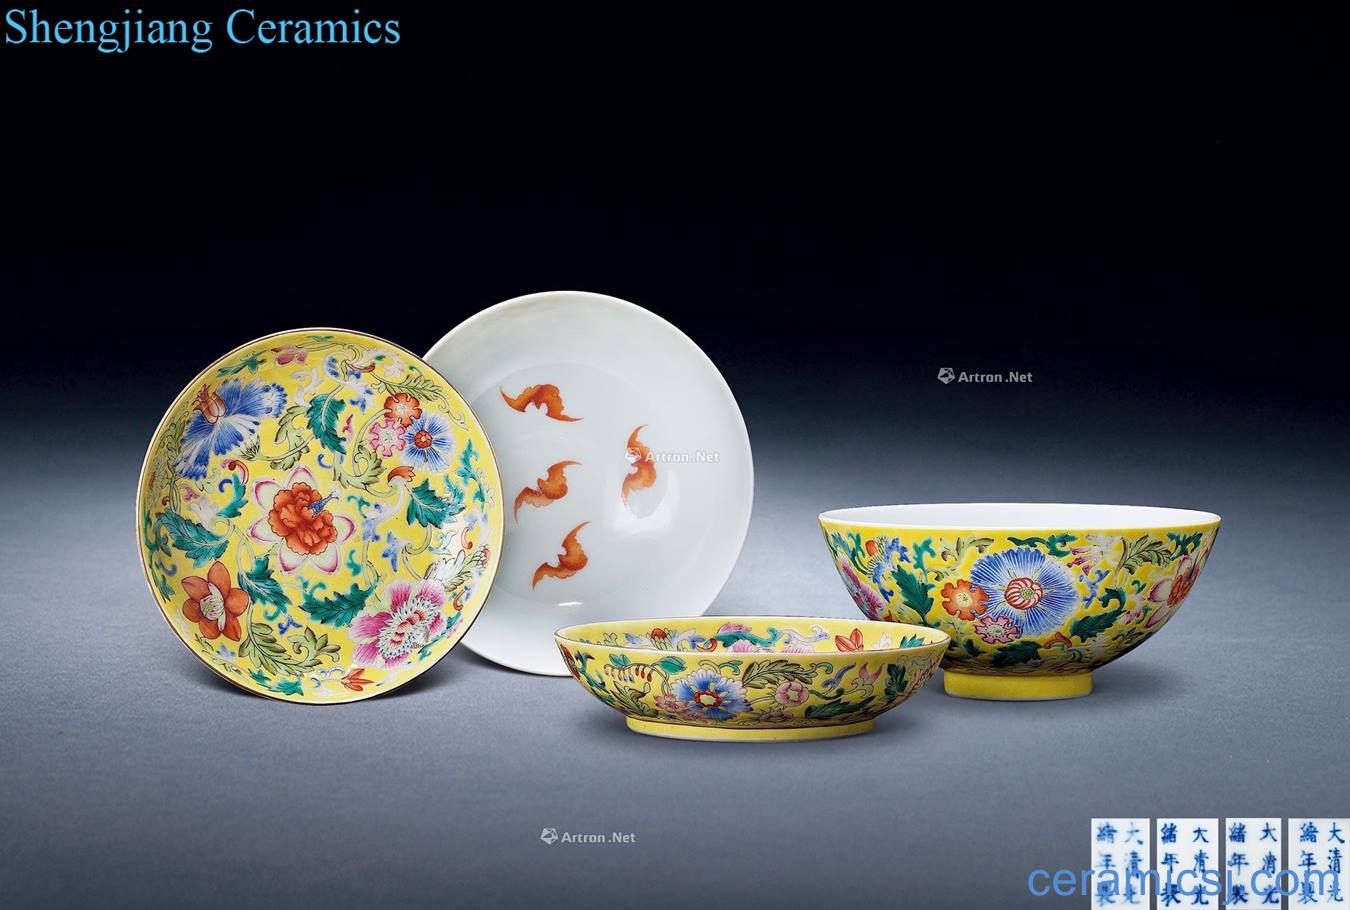 Qing guangxu To color the flowers yellow lines to the small bowl, yellow colored flower tray (a)